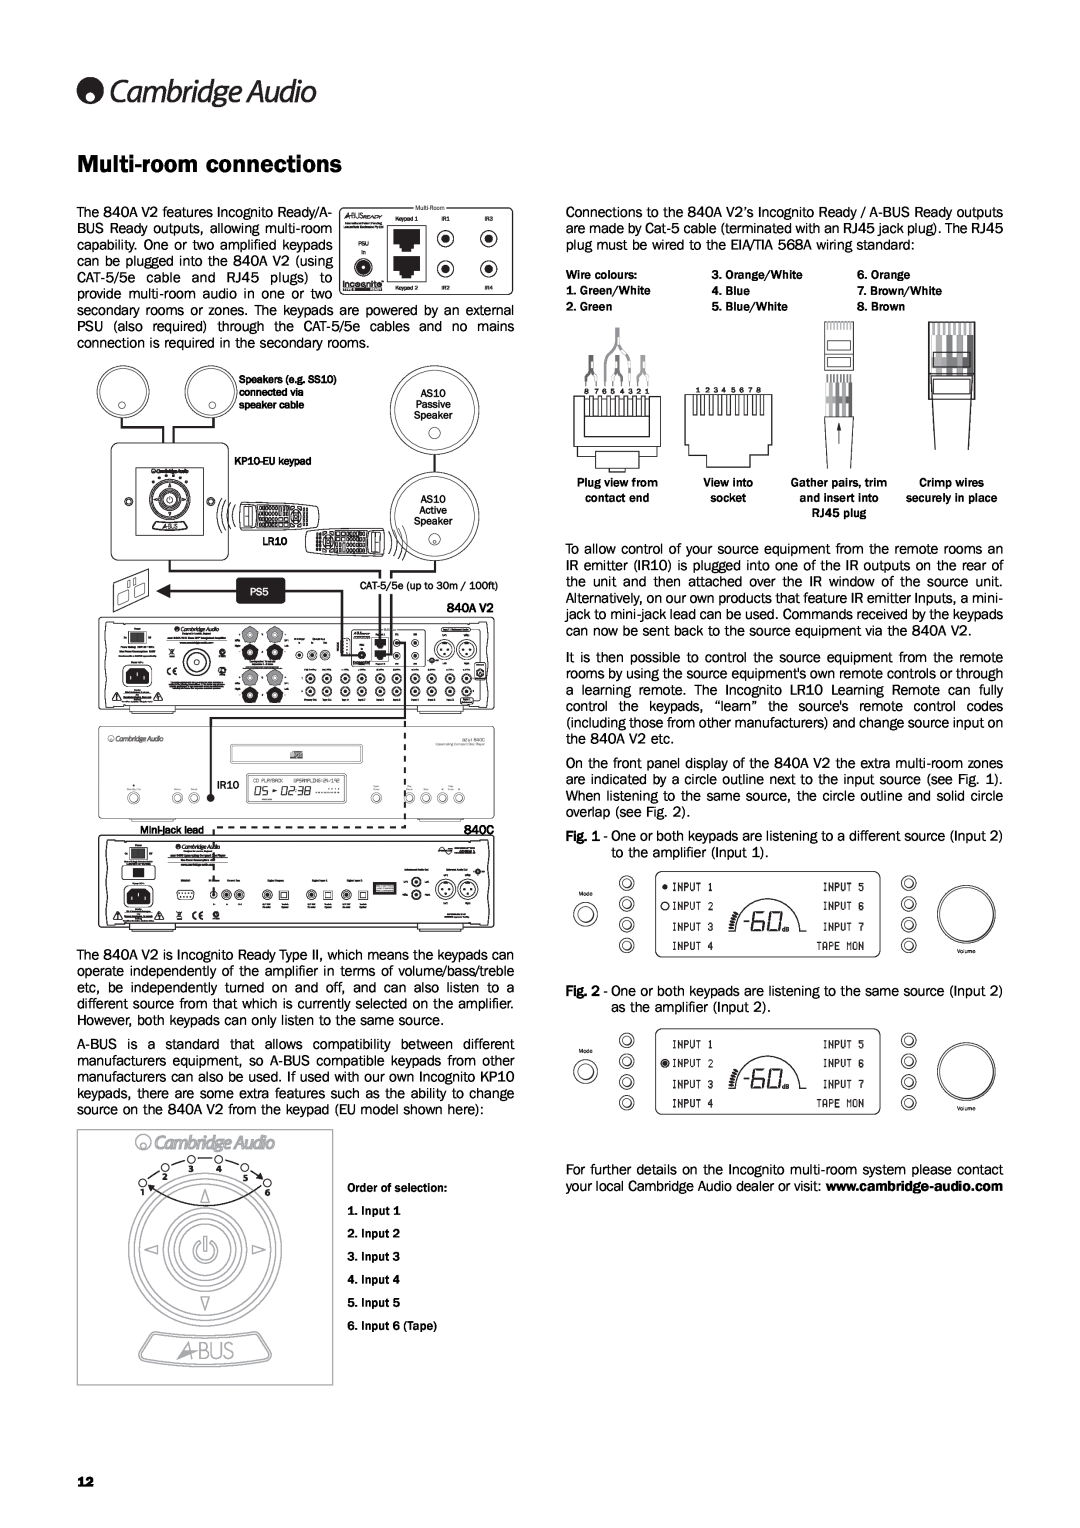 Cambridge Audio 840A V2 user manual Multi-roomconnections, 840C 